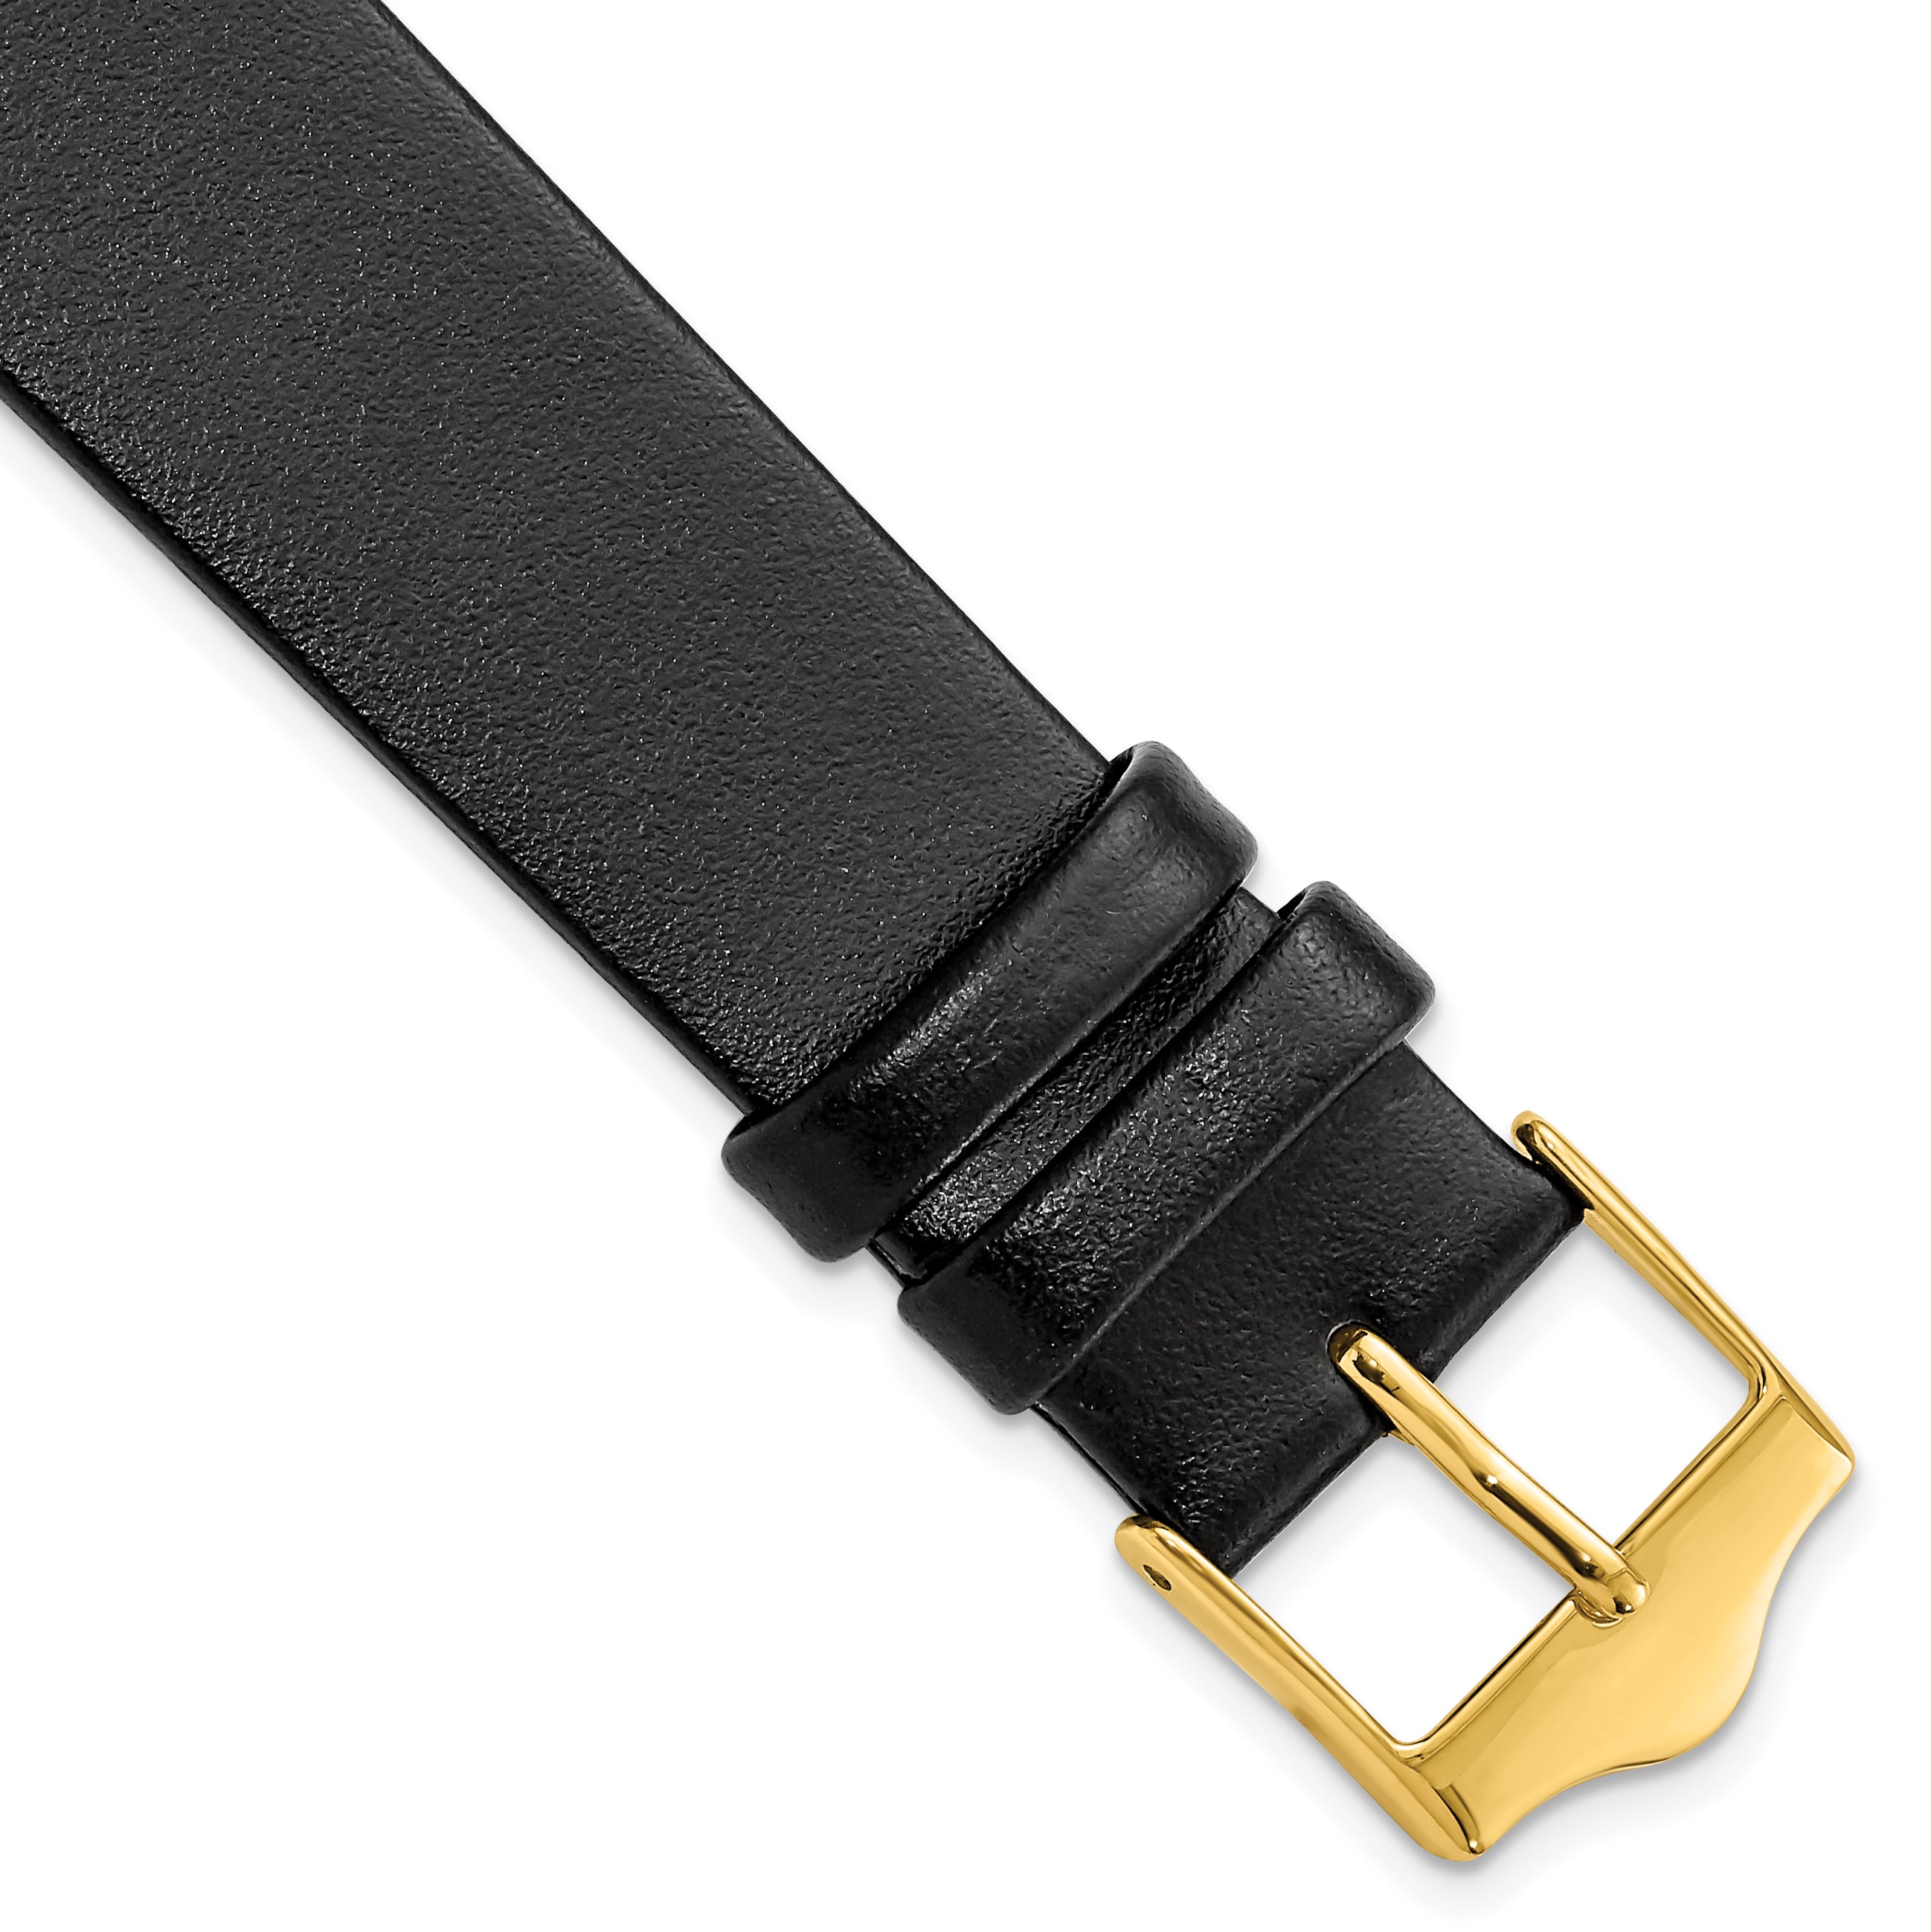 DeBeer 18mm Black Smooth Flat Leather with Gold-tone Buckle 7.5 inch Watch Band